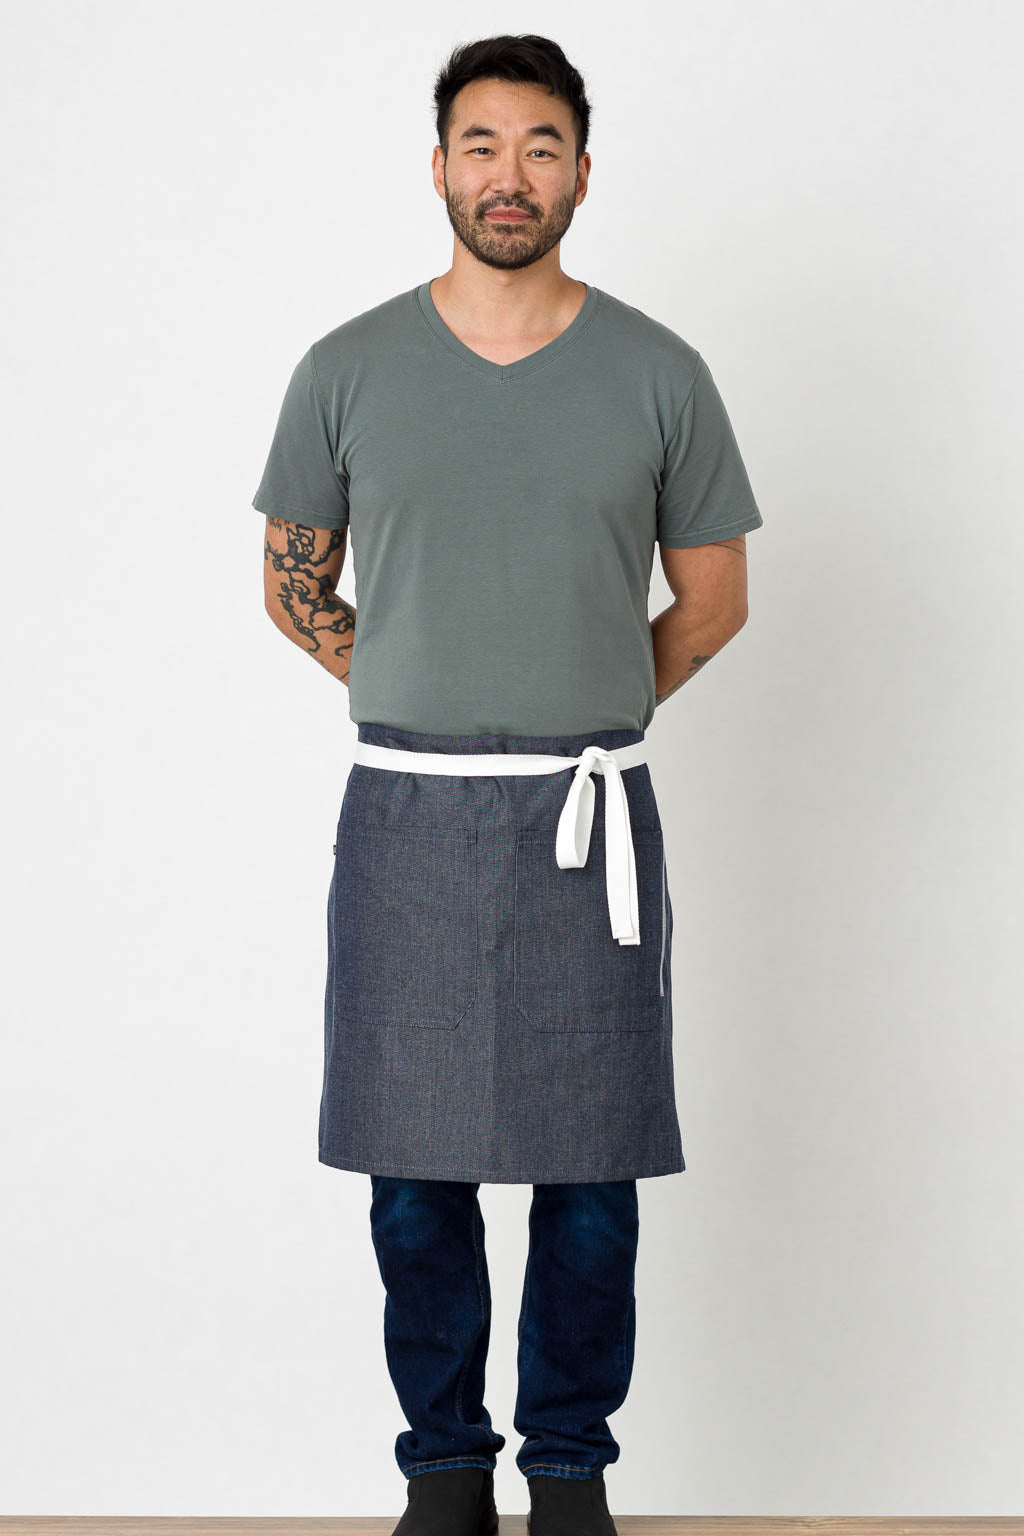 Bistro Middly Apron, Wrinkle Resistant, 20"L, Blue Denim with White Straps, Poly-Cotton